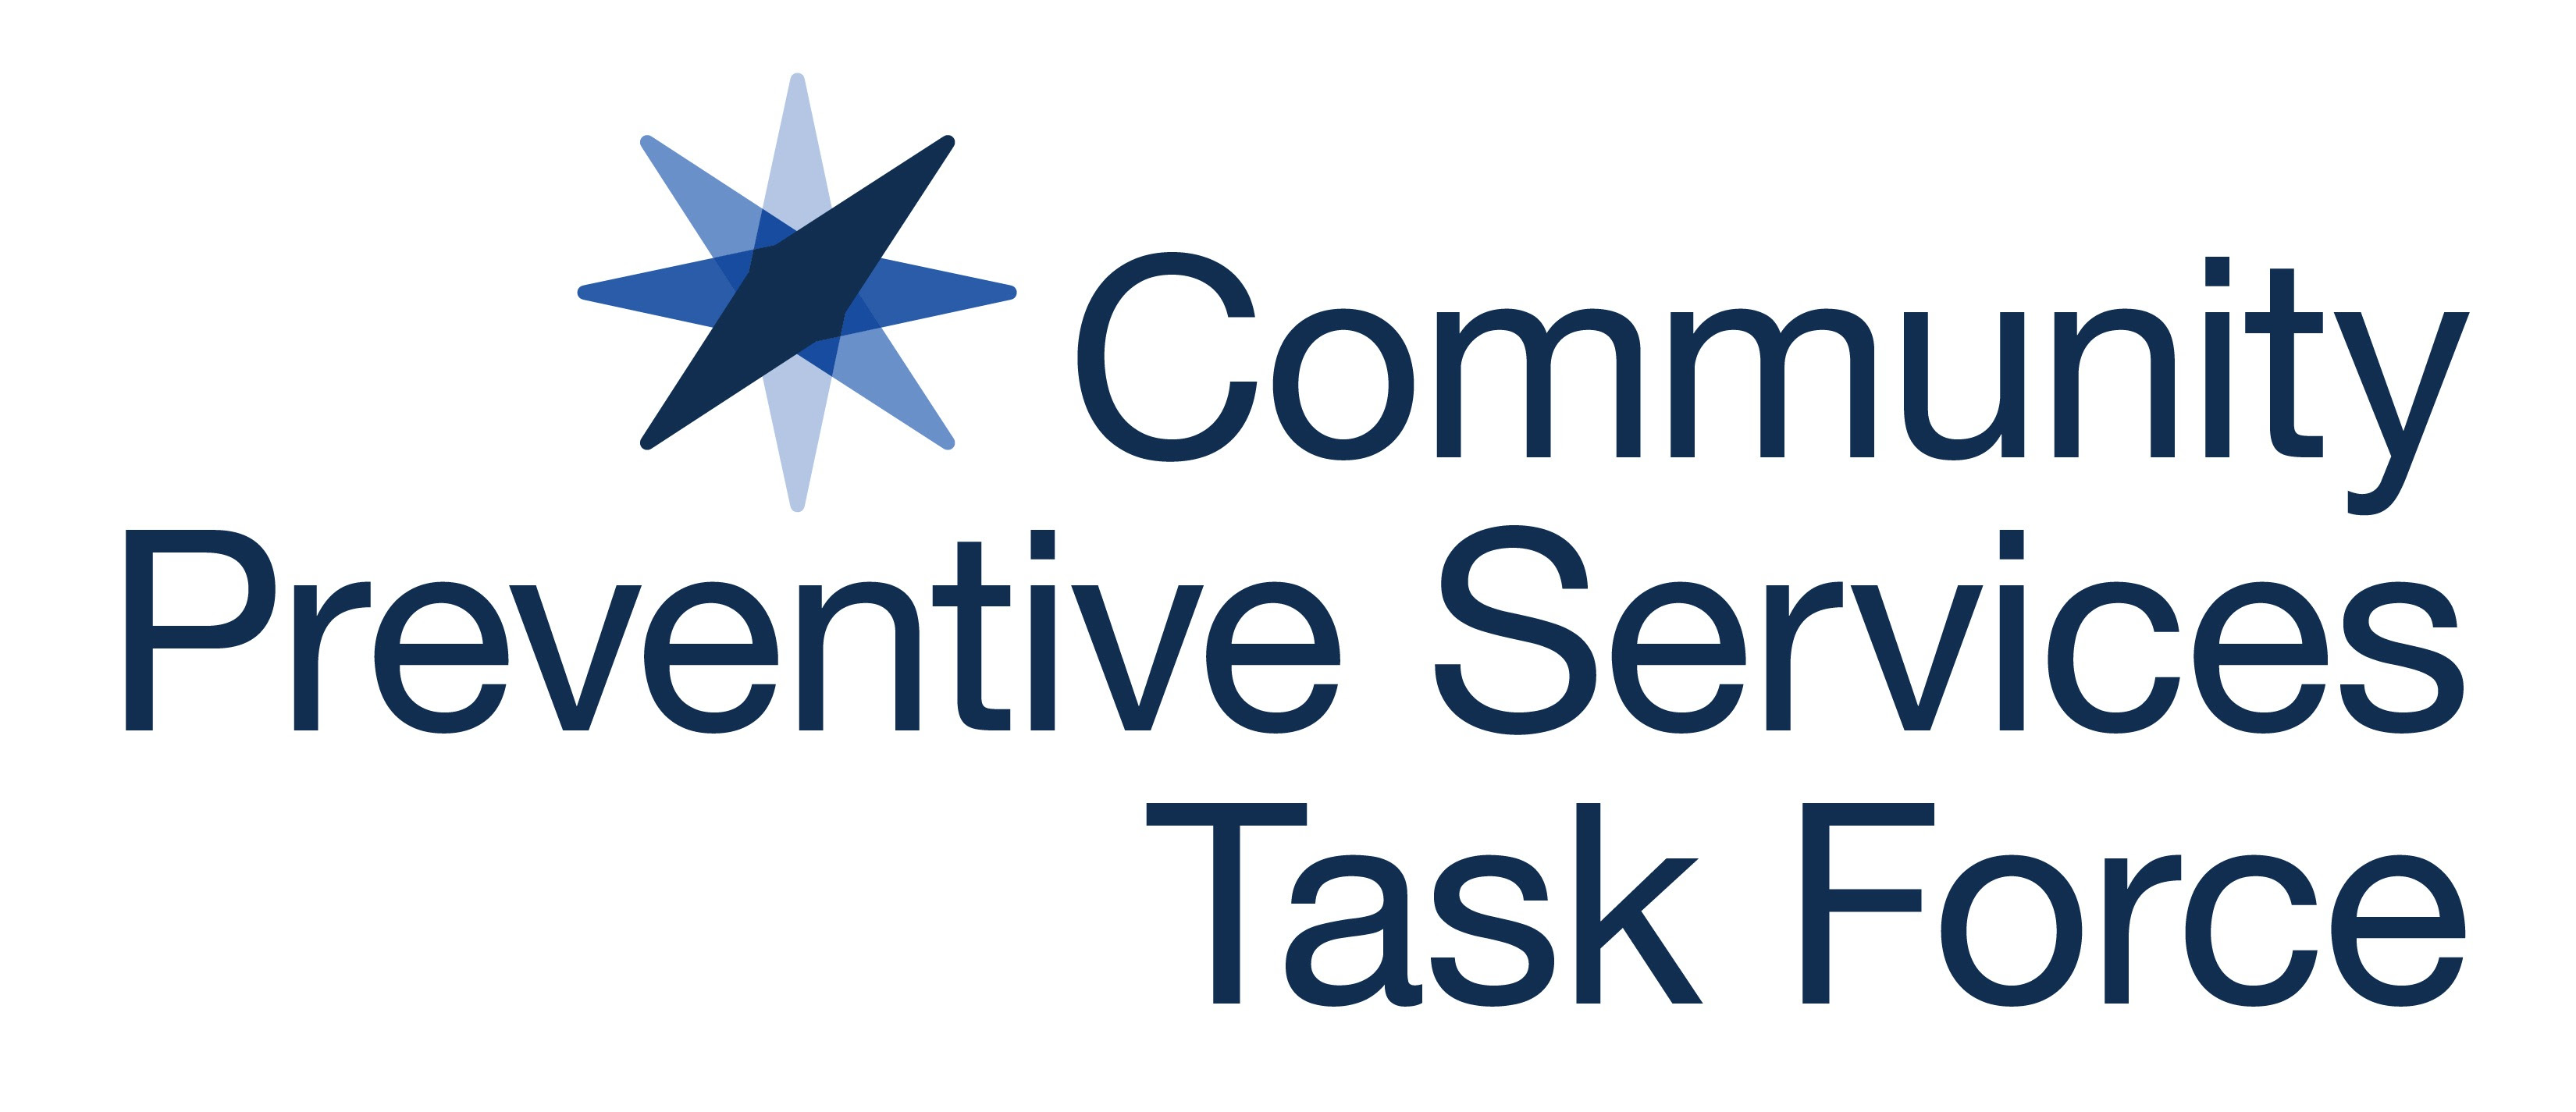 The Community Preventive Services Task Force